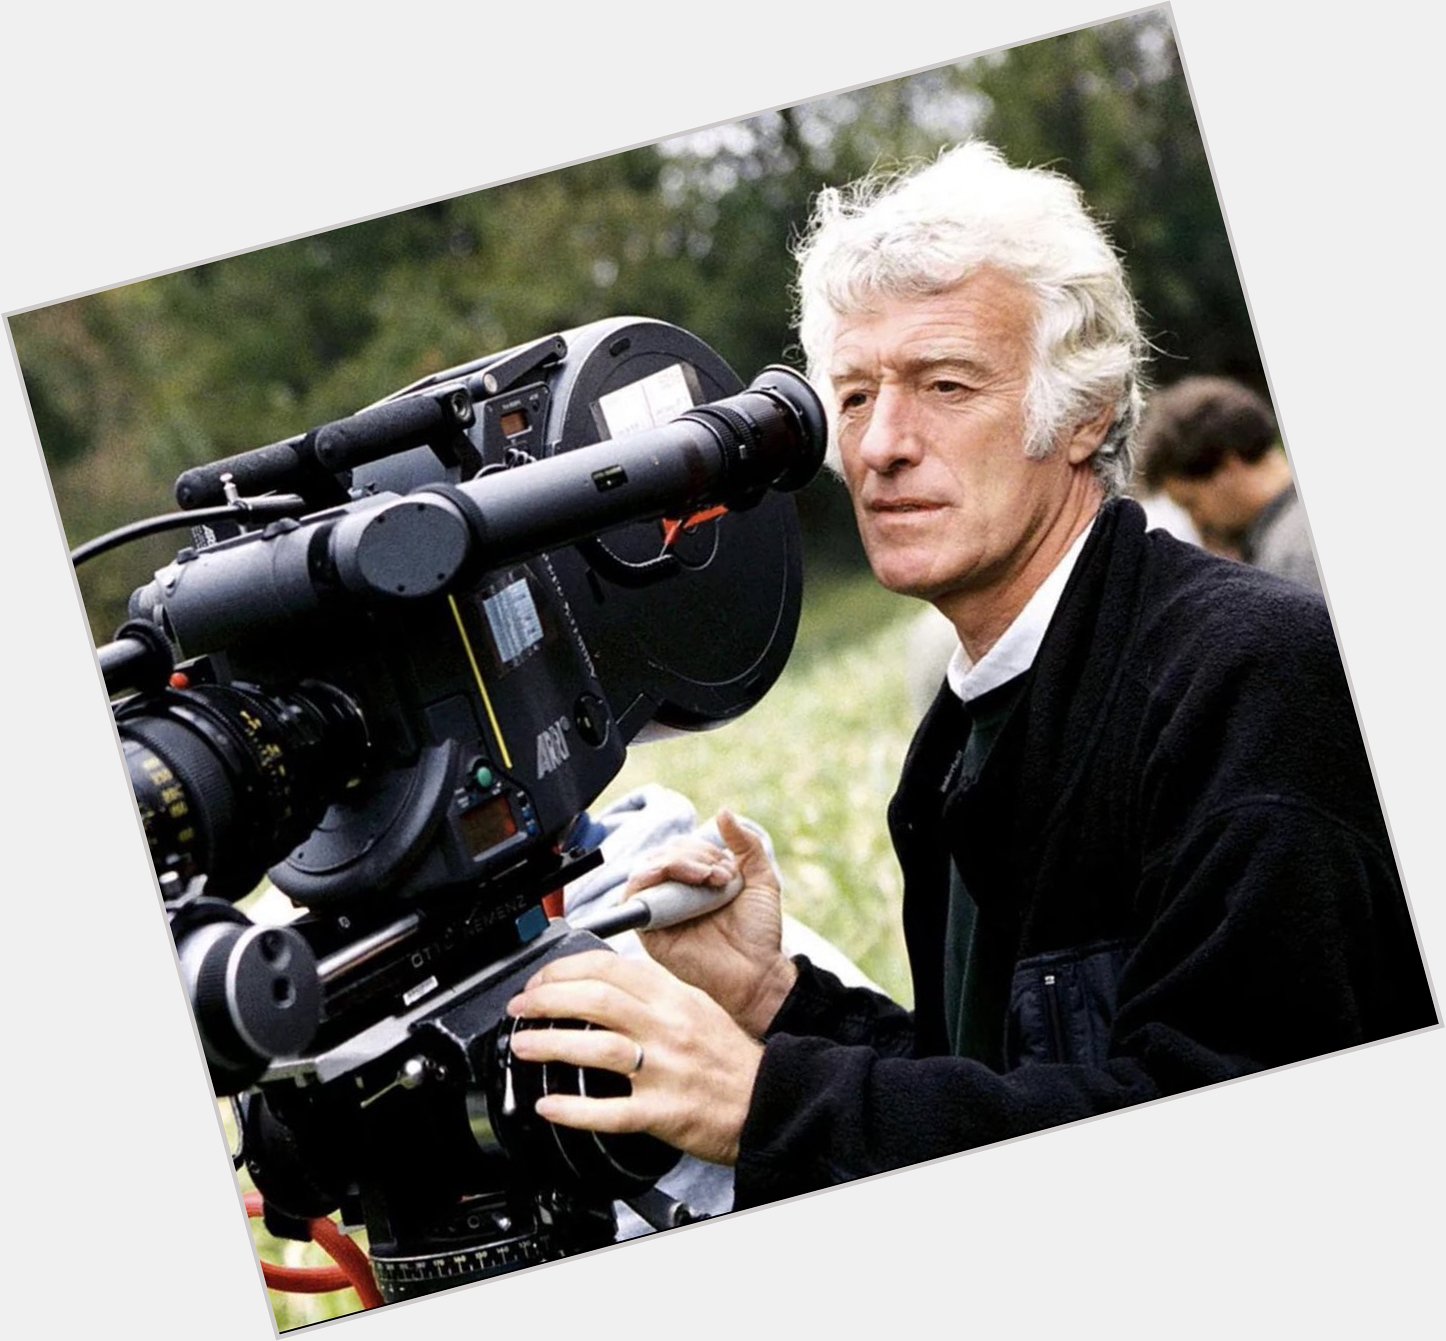 Happy Birthday to this legend! Favorite movie Roger Deakins has DP d for? 